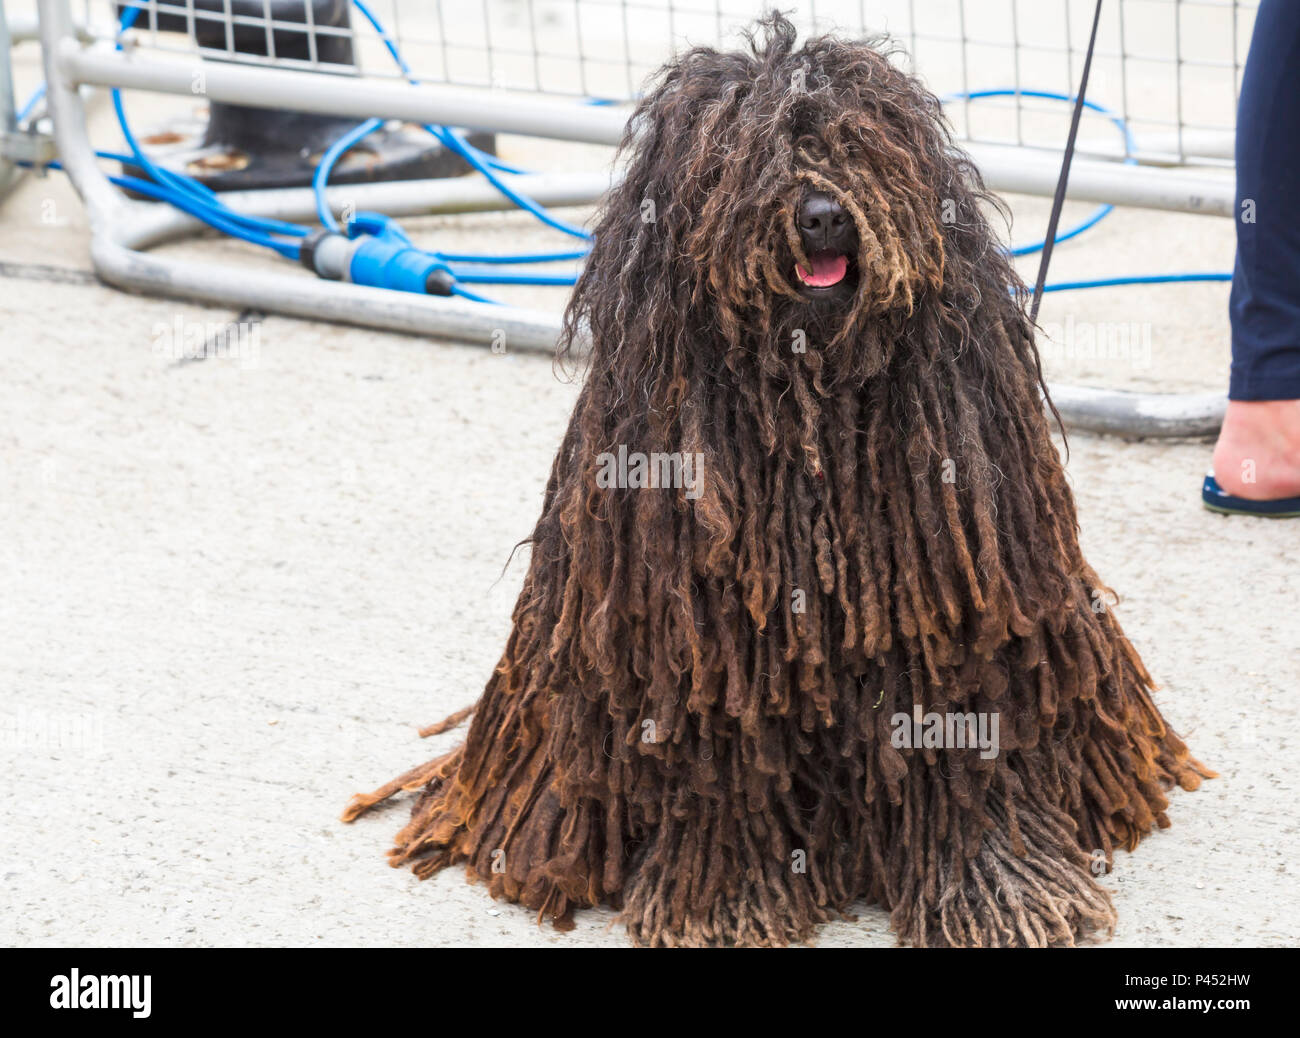 Hungarian puli dog, also known as mop dog, at Poole, Dorset UK in June Stock Photo